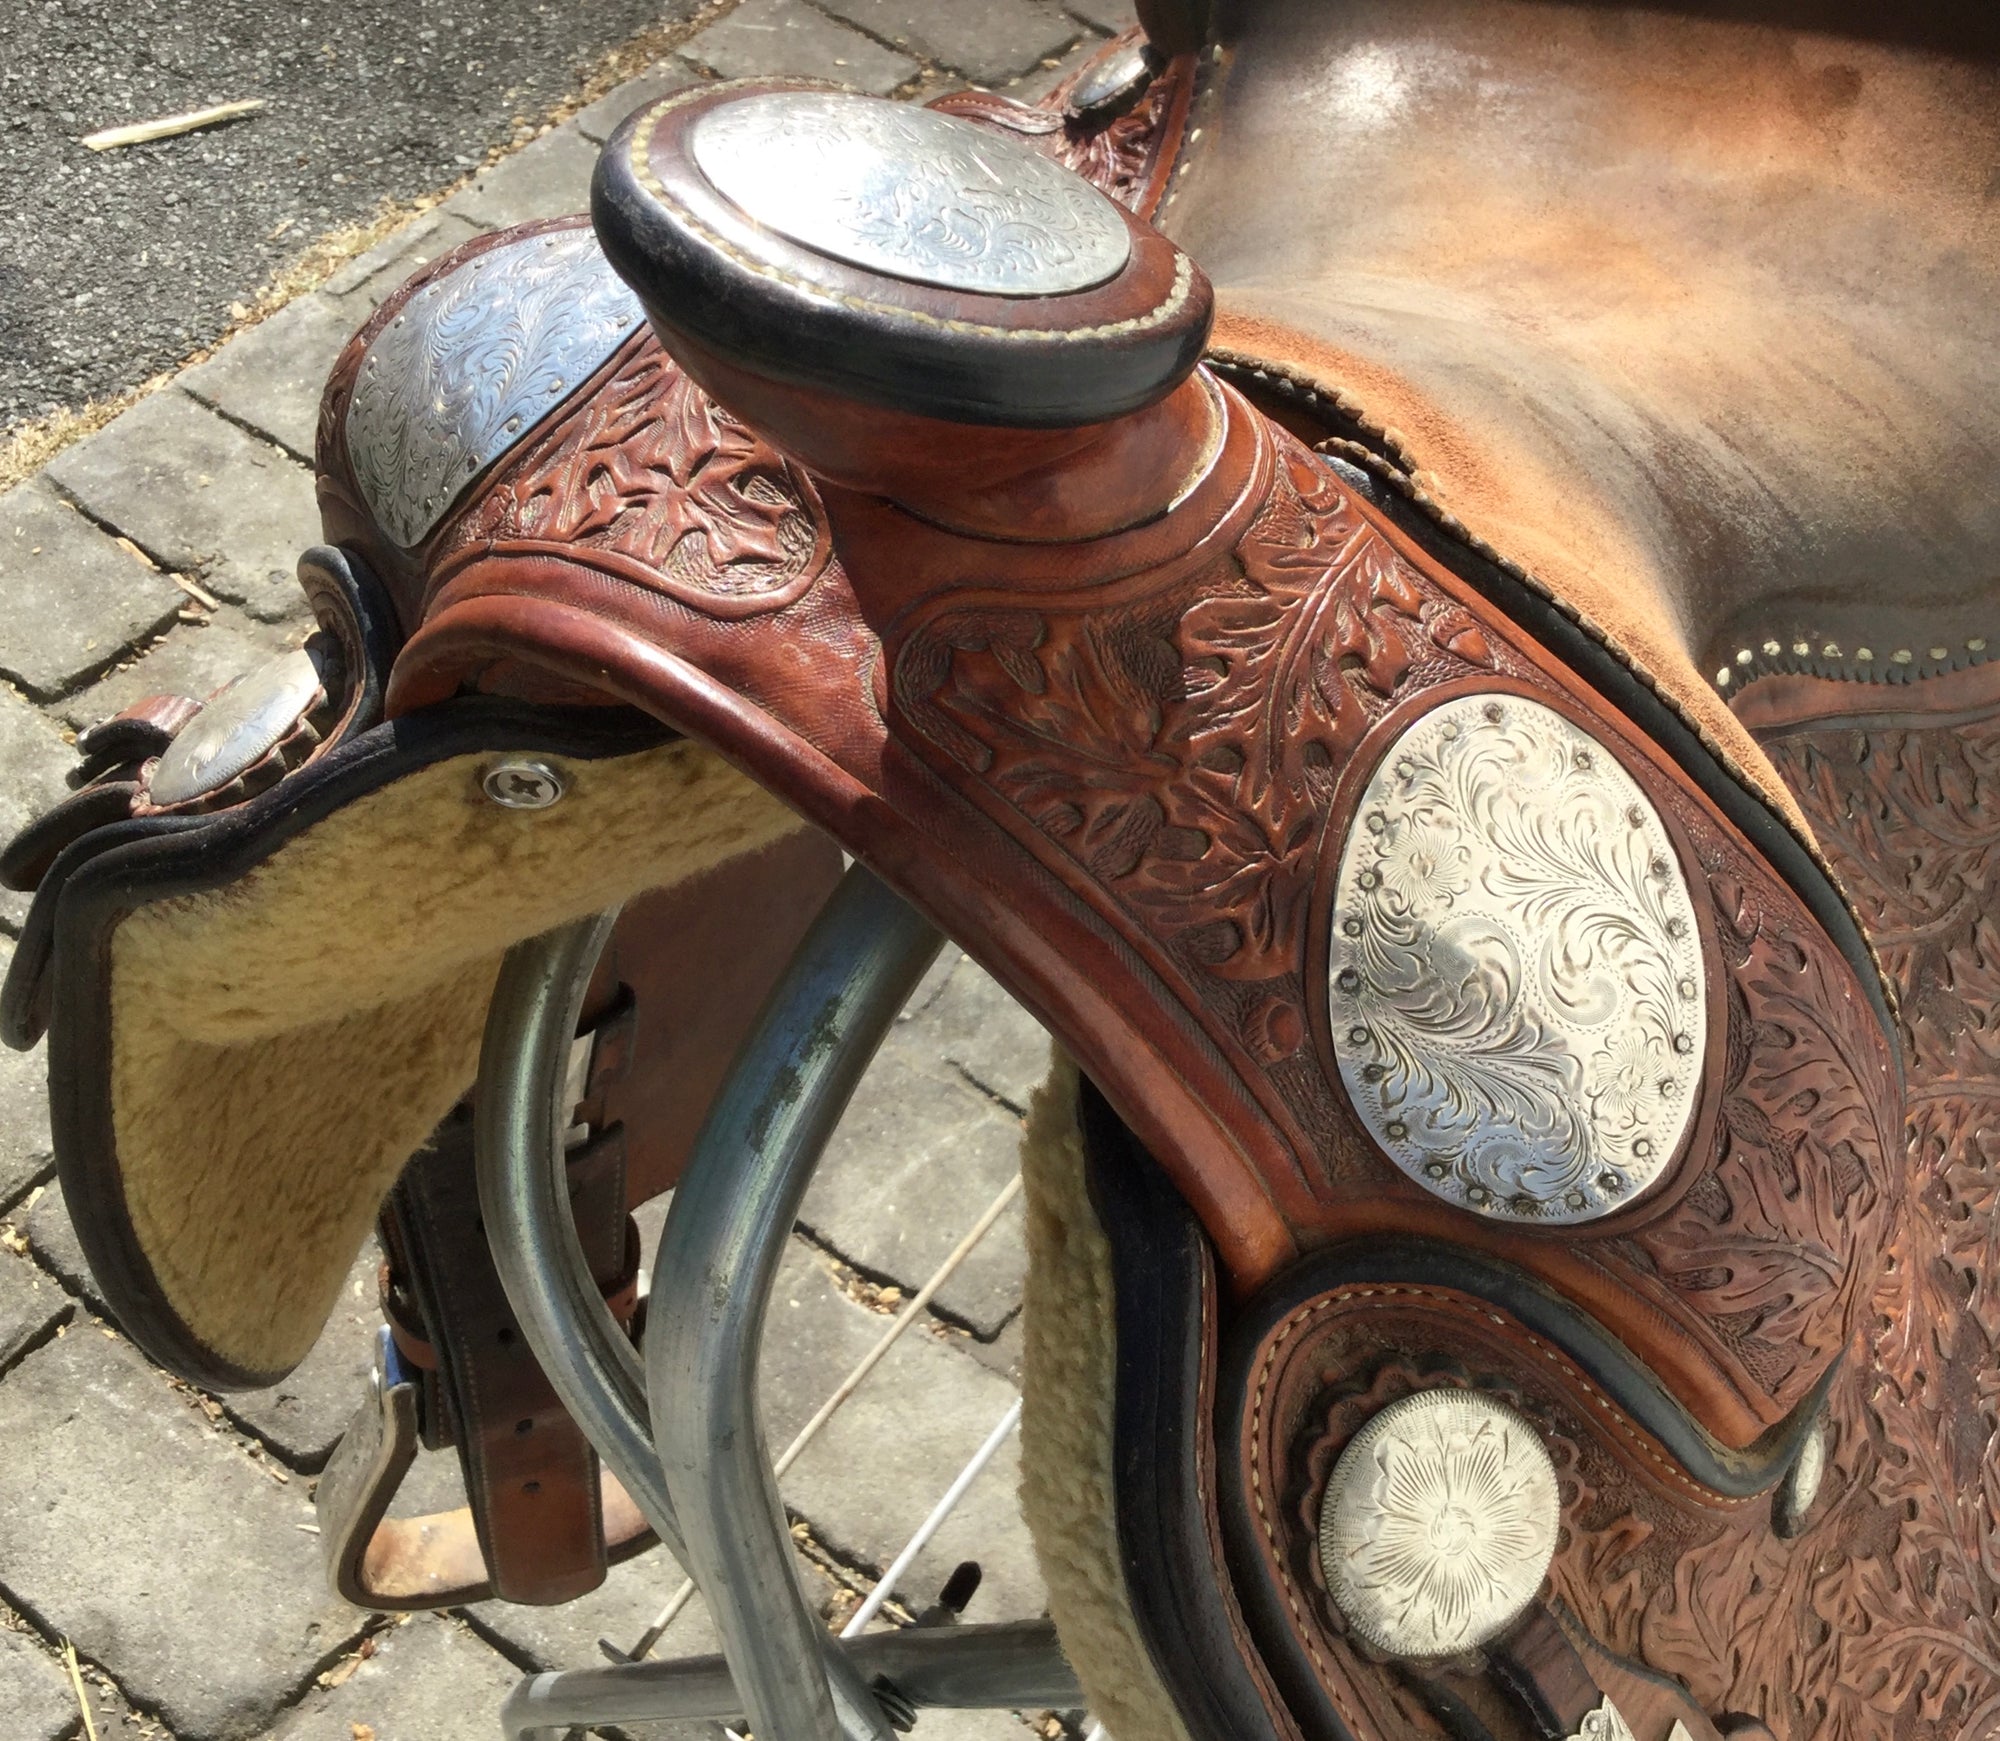 GoHorseShow - Phil Harris Offers Advice on Finding Your Dream Saddle